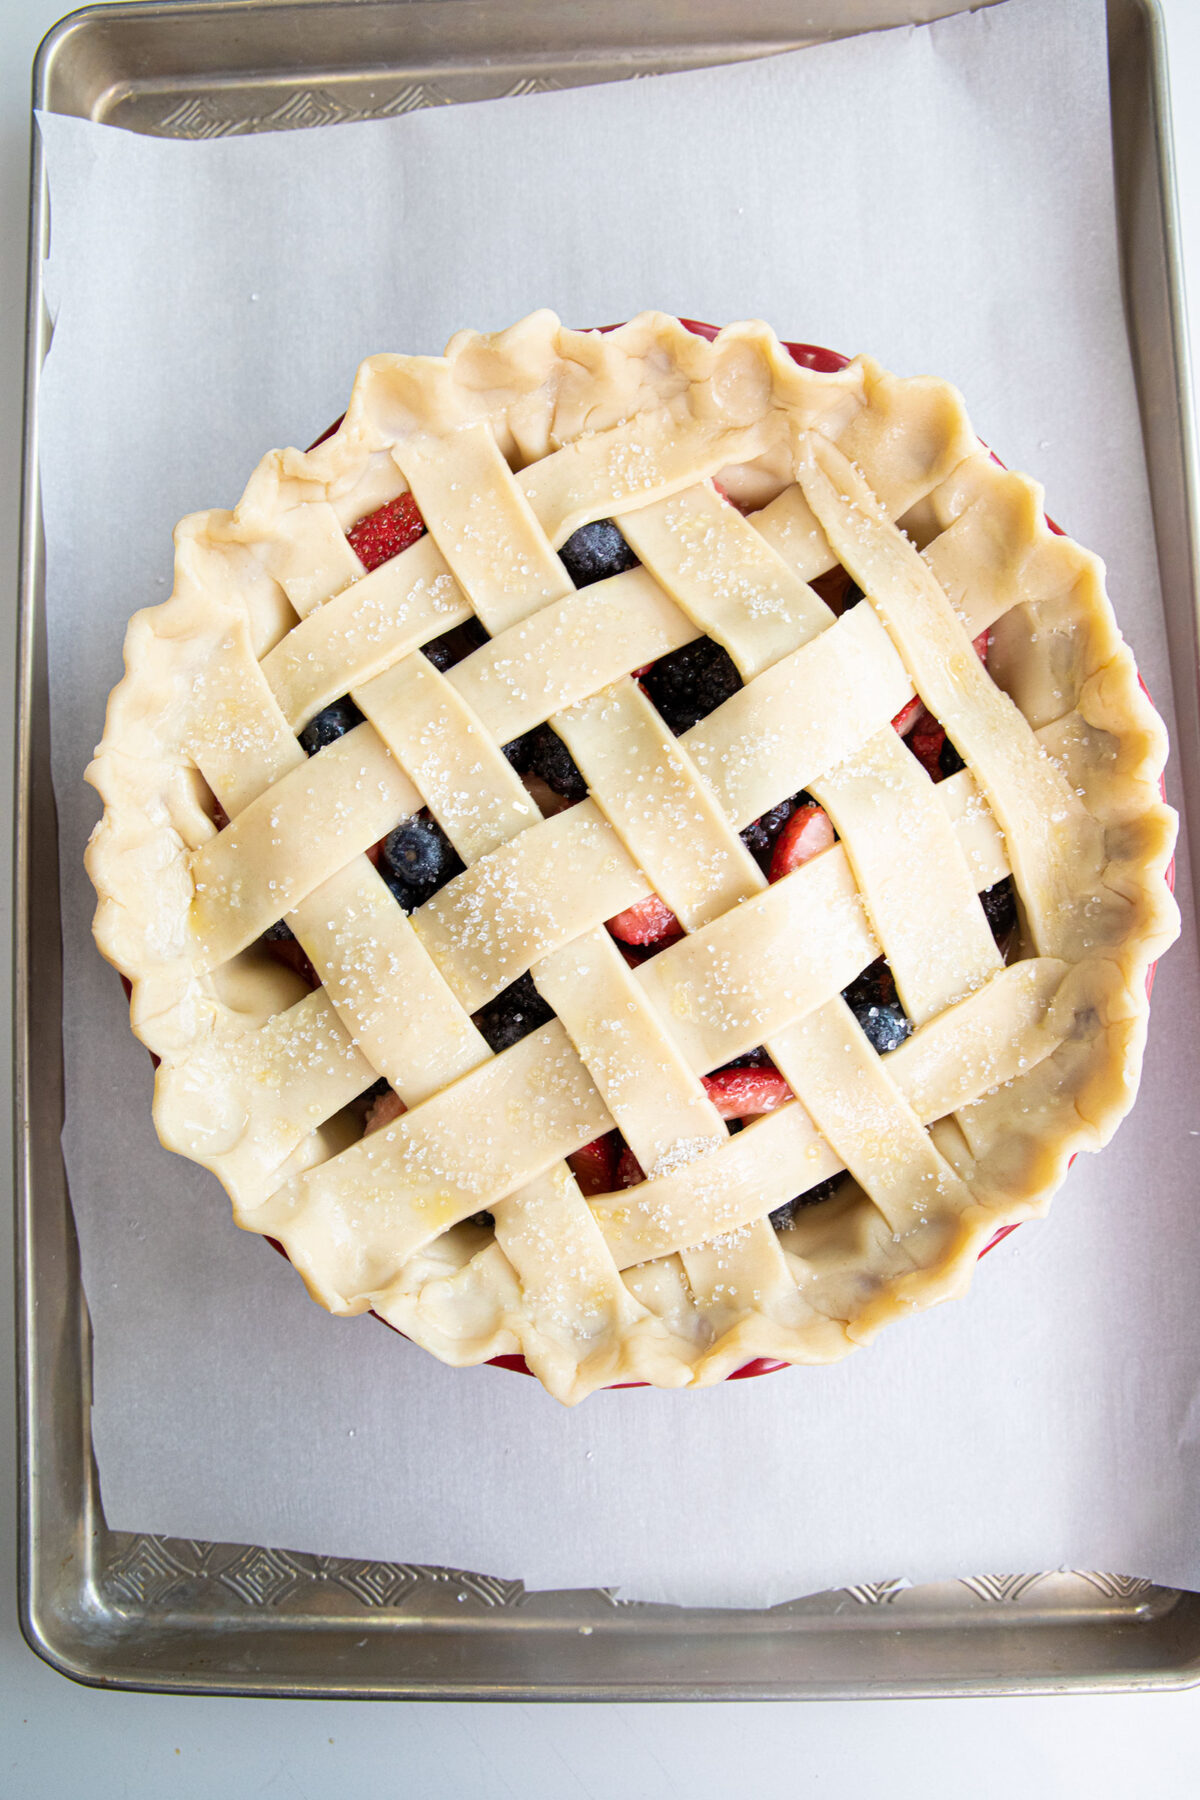 mixed berry pie with lattice crust ready to bake